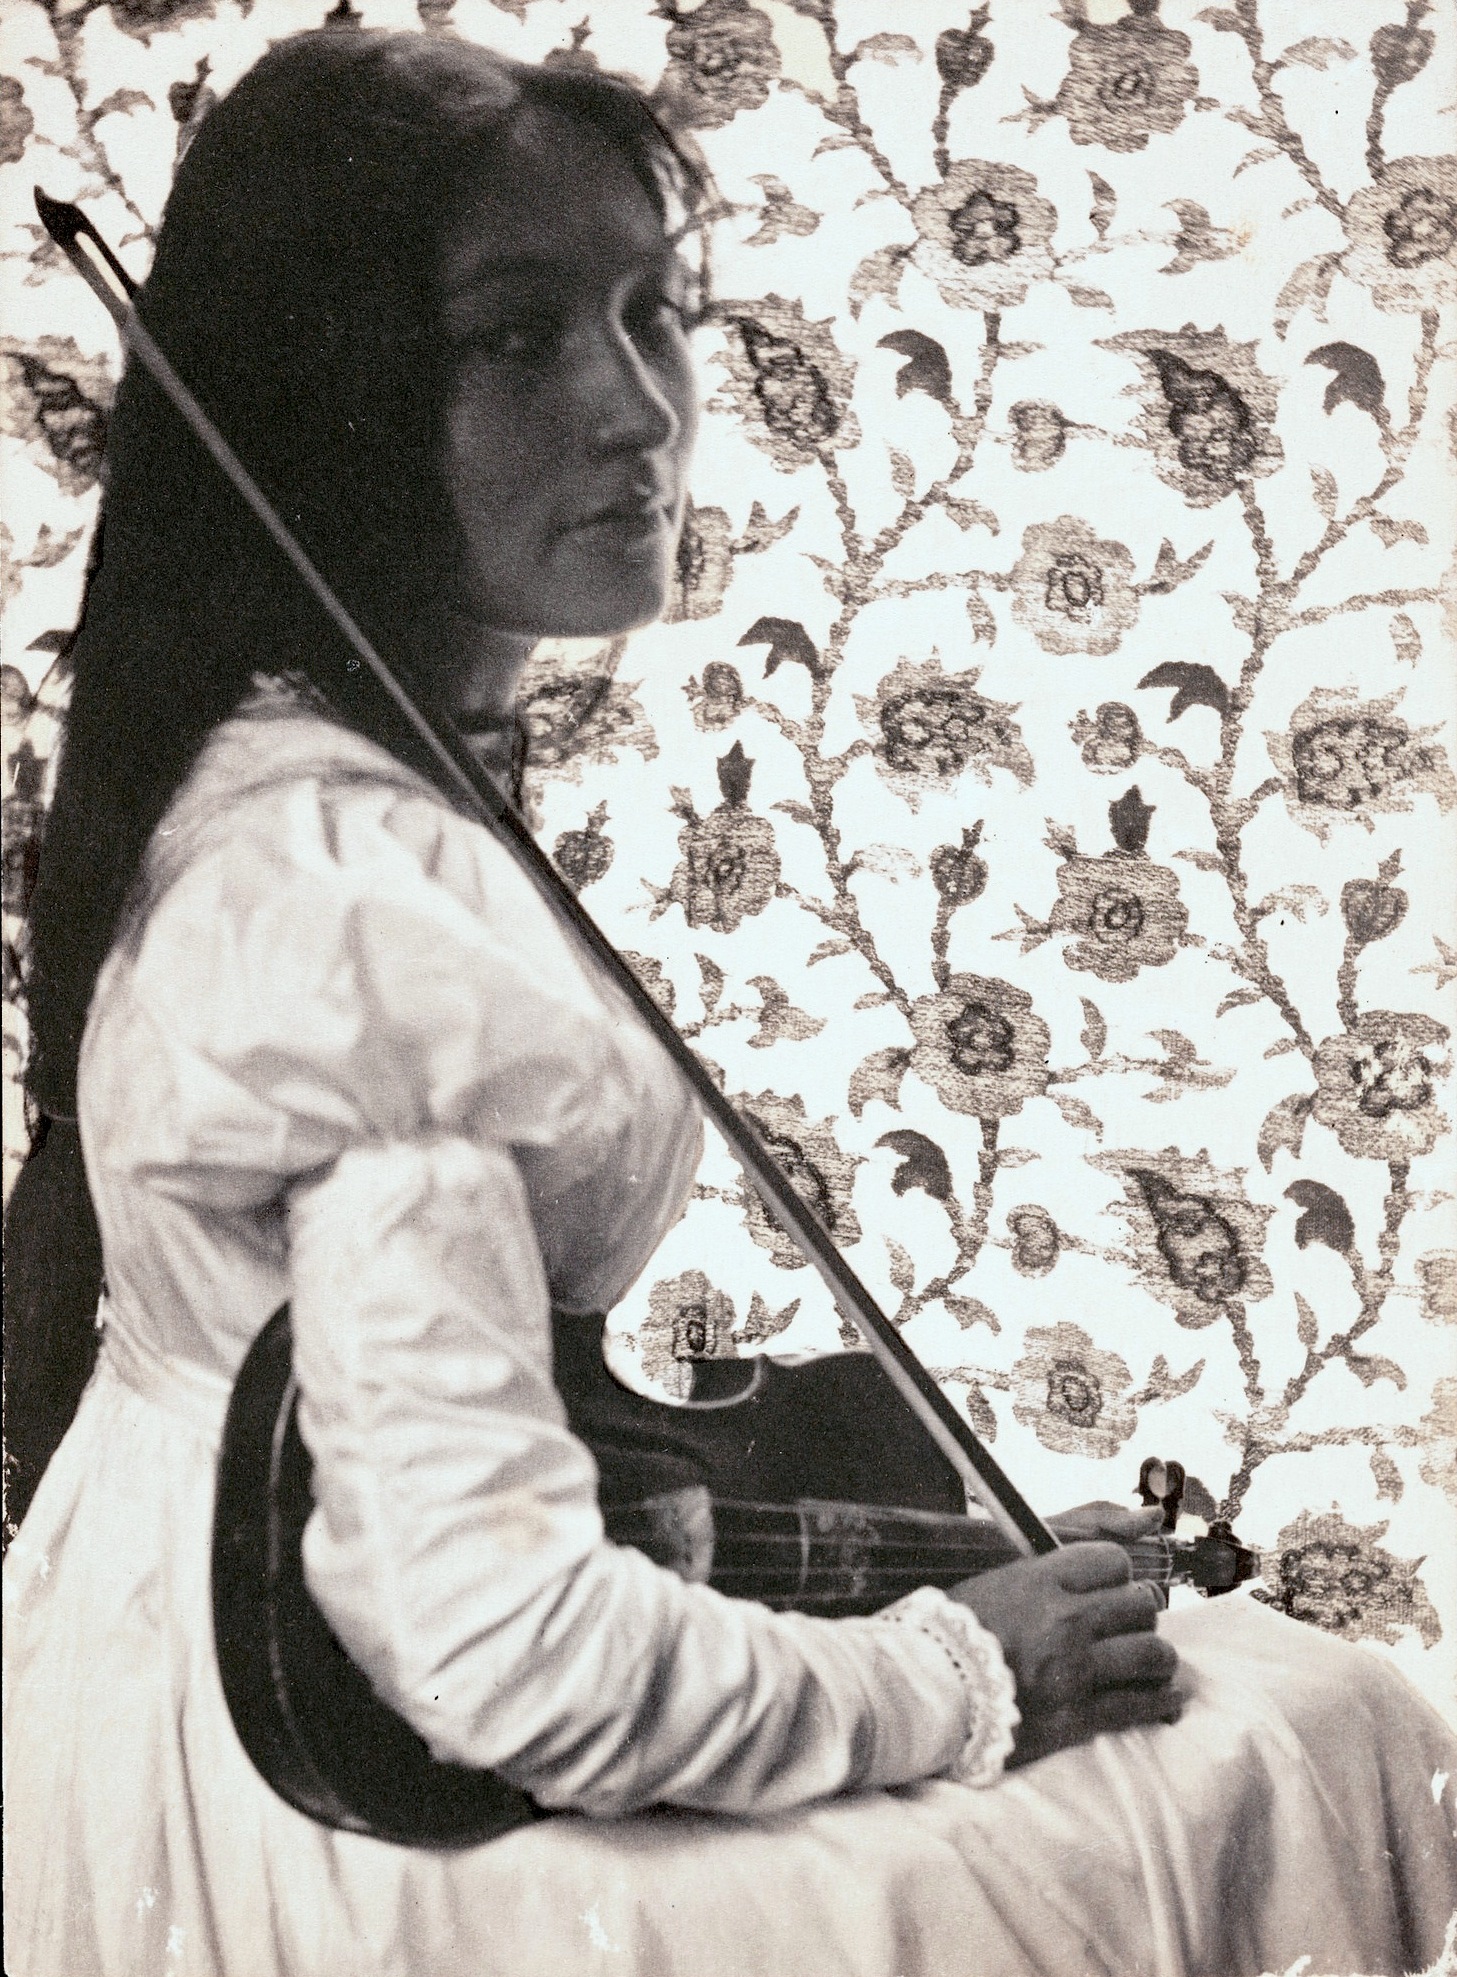 Photograph of Zitkala-Ša with her violin in 1898